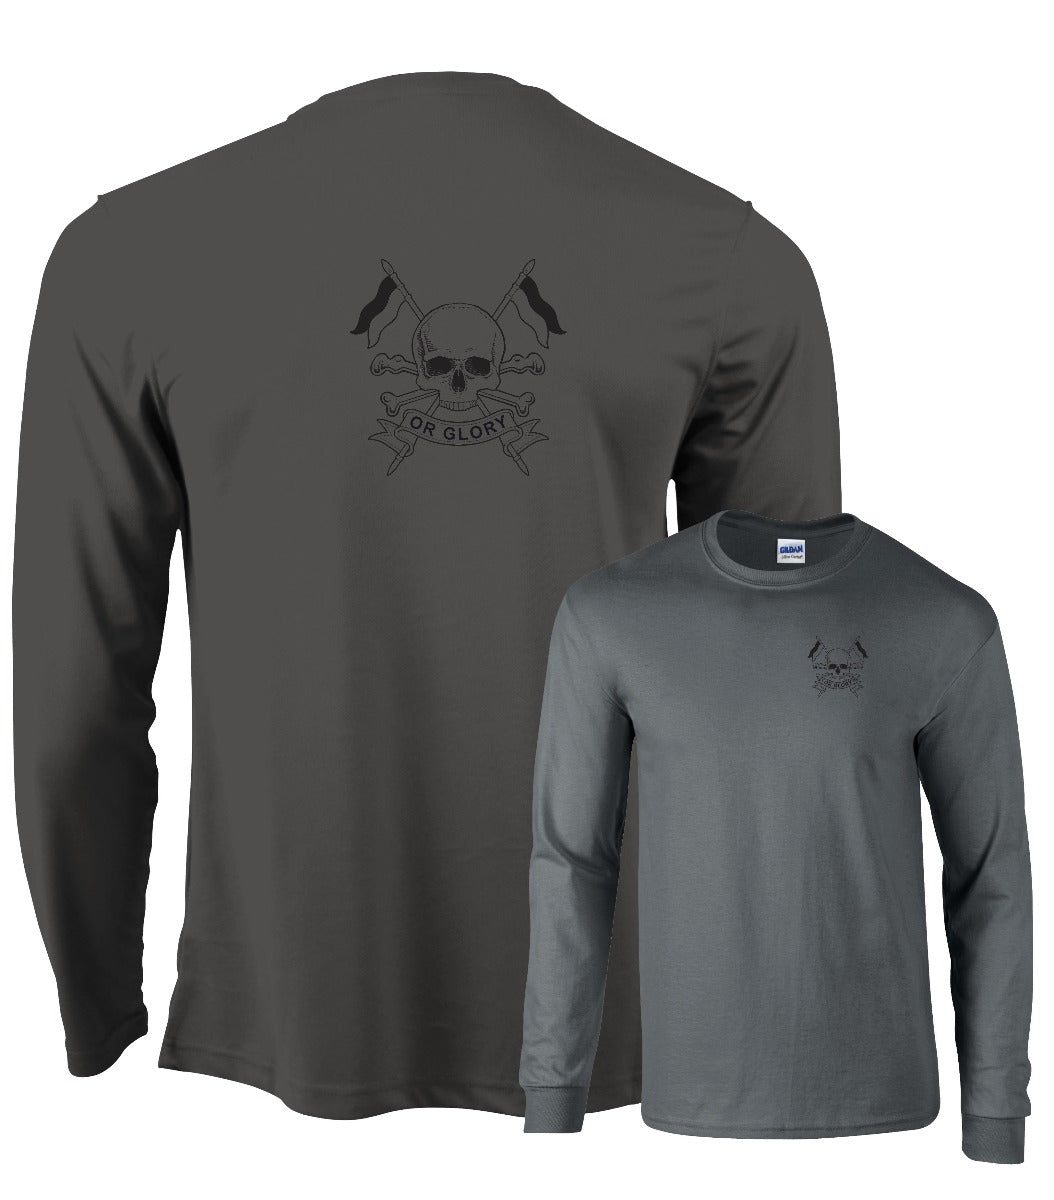 Double Printed Royal Lancers Long sleeve Wicking T-Shirt